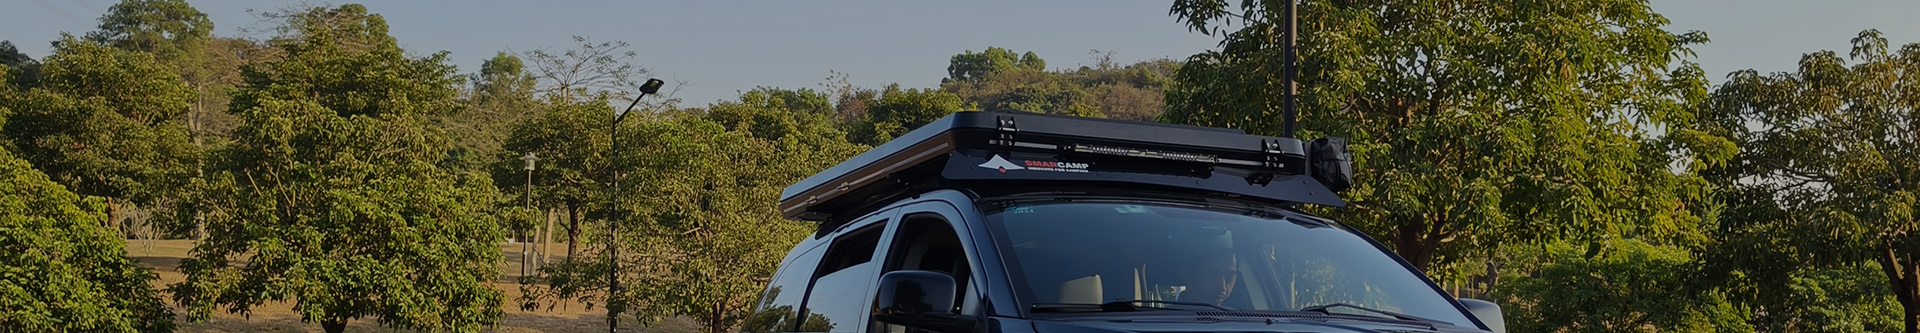 Hard Shell Roof Top Tent For Ranger